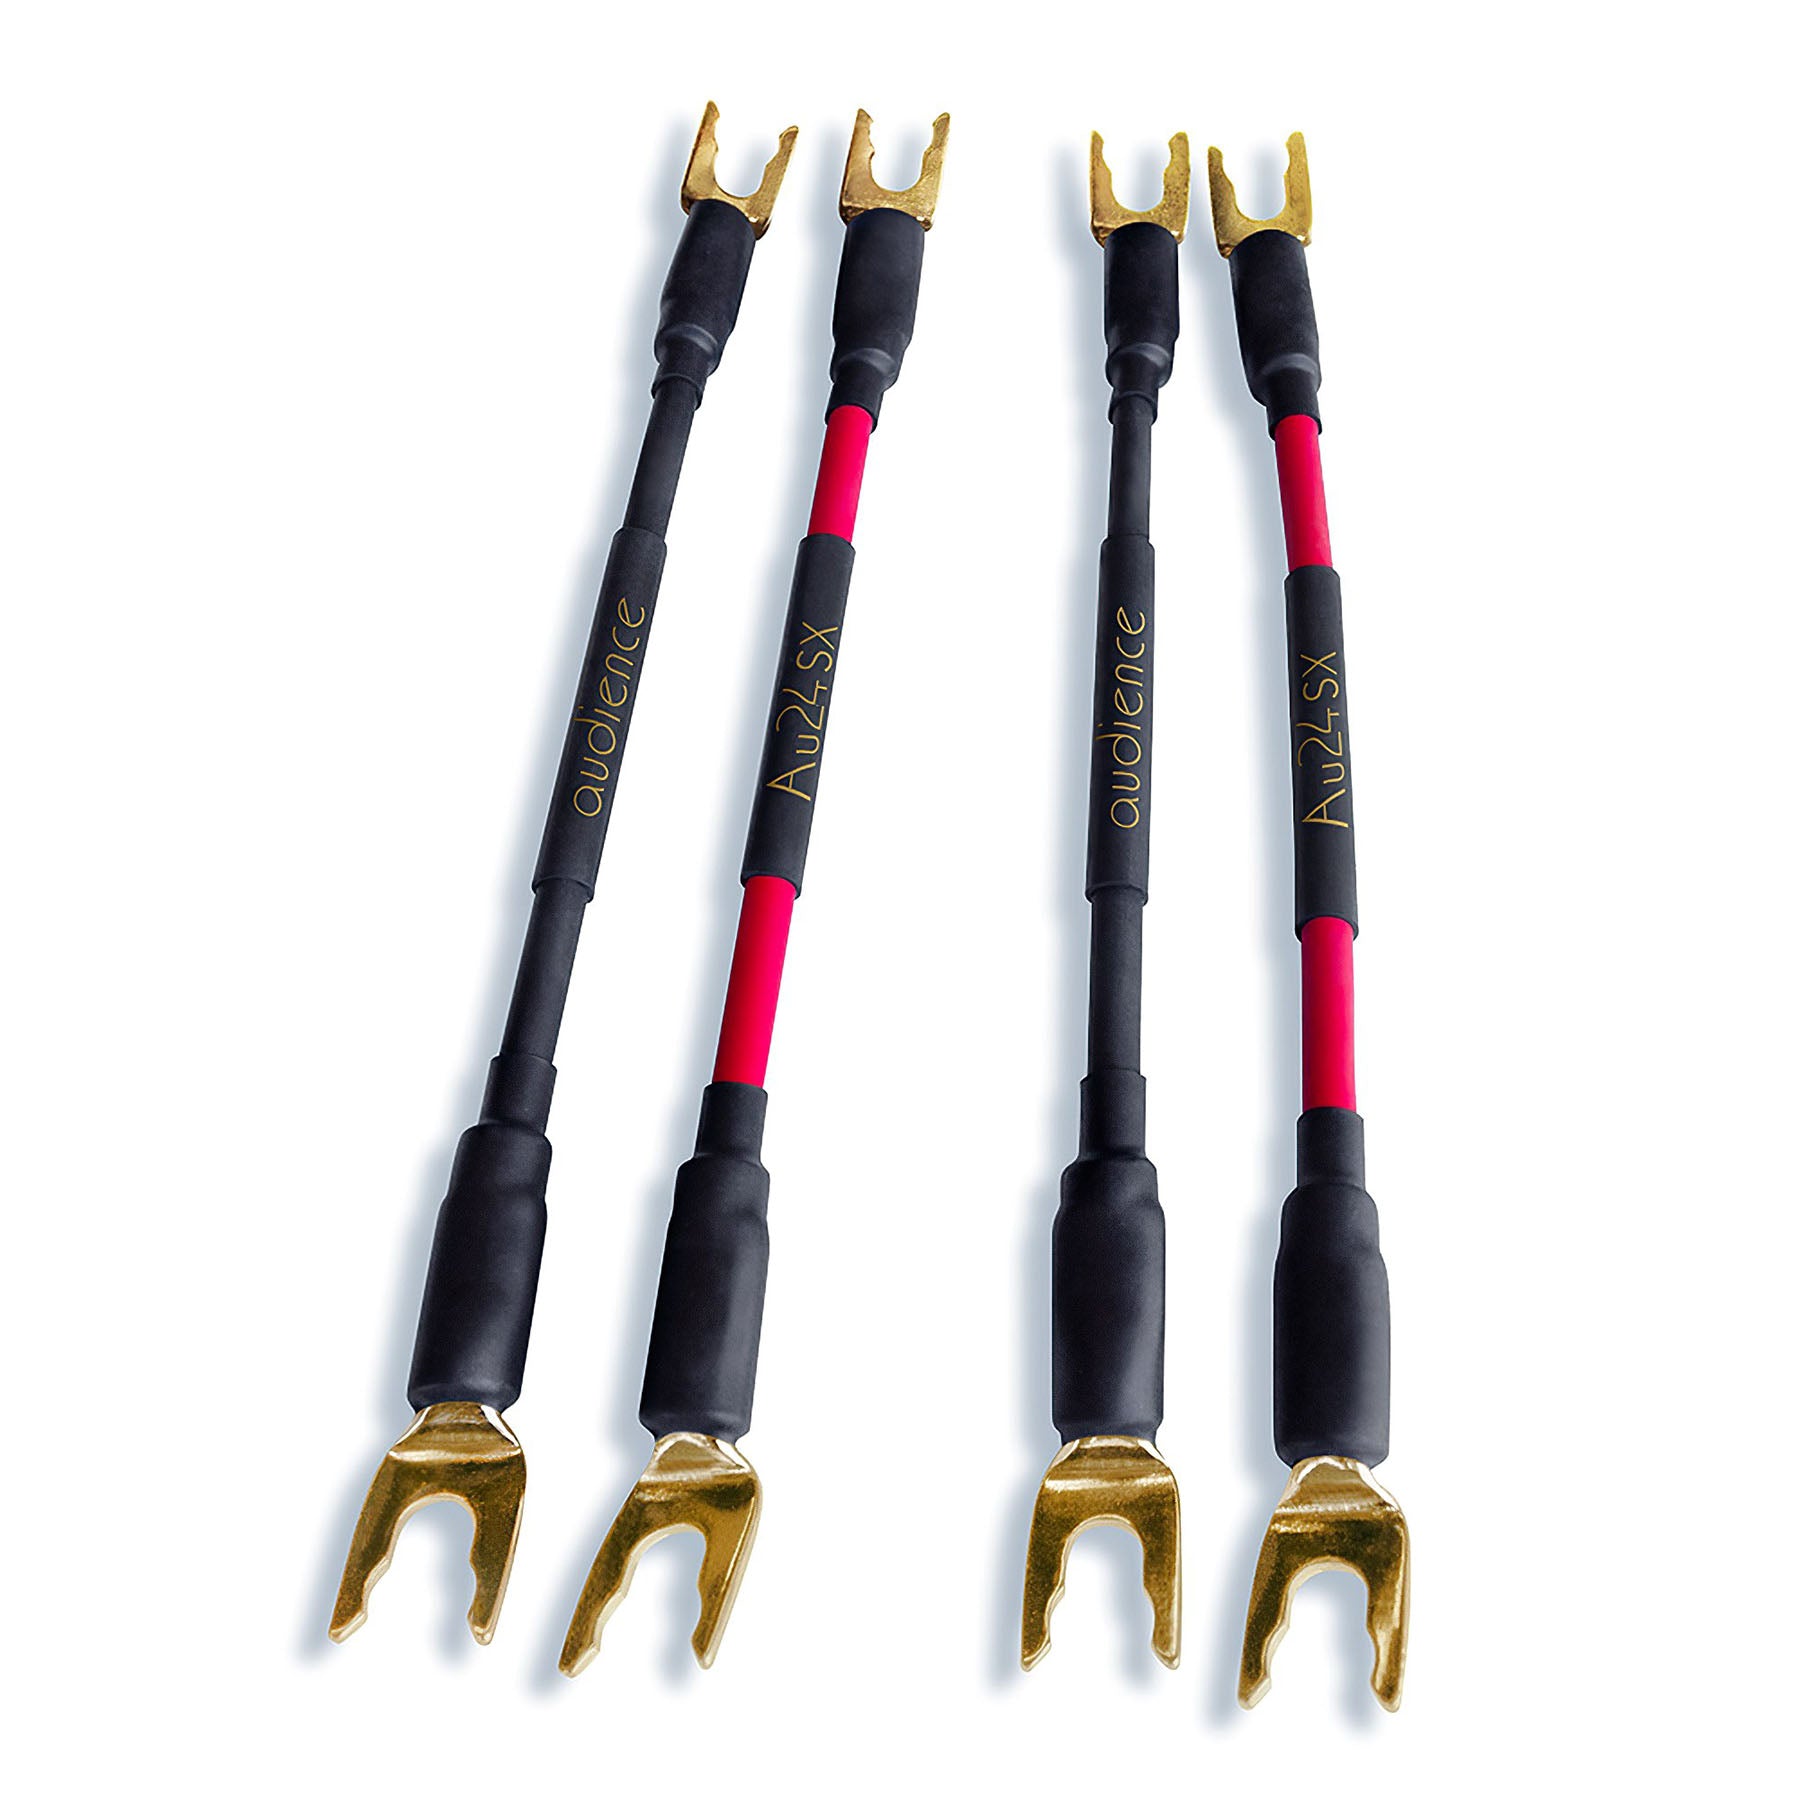 Audience Au24 SX Bi-wired Jumper Cables (set of 4)